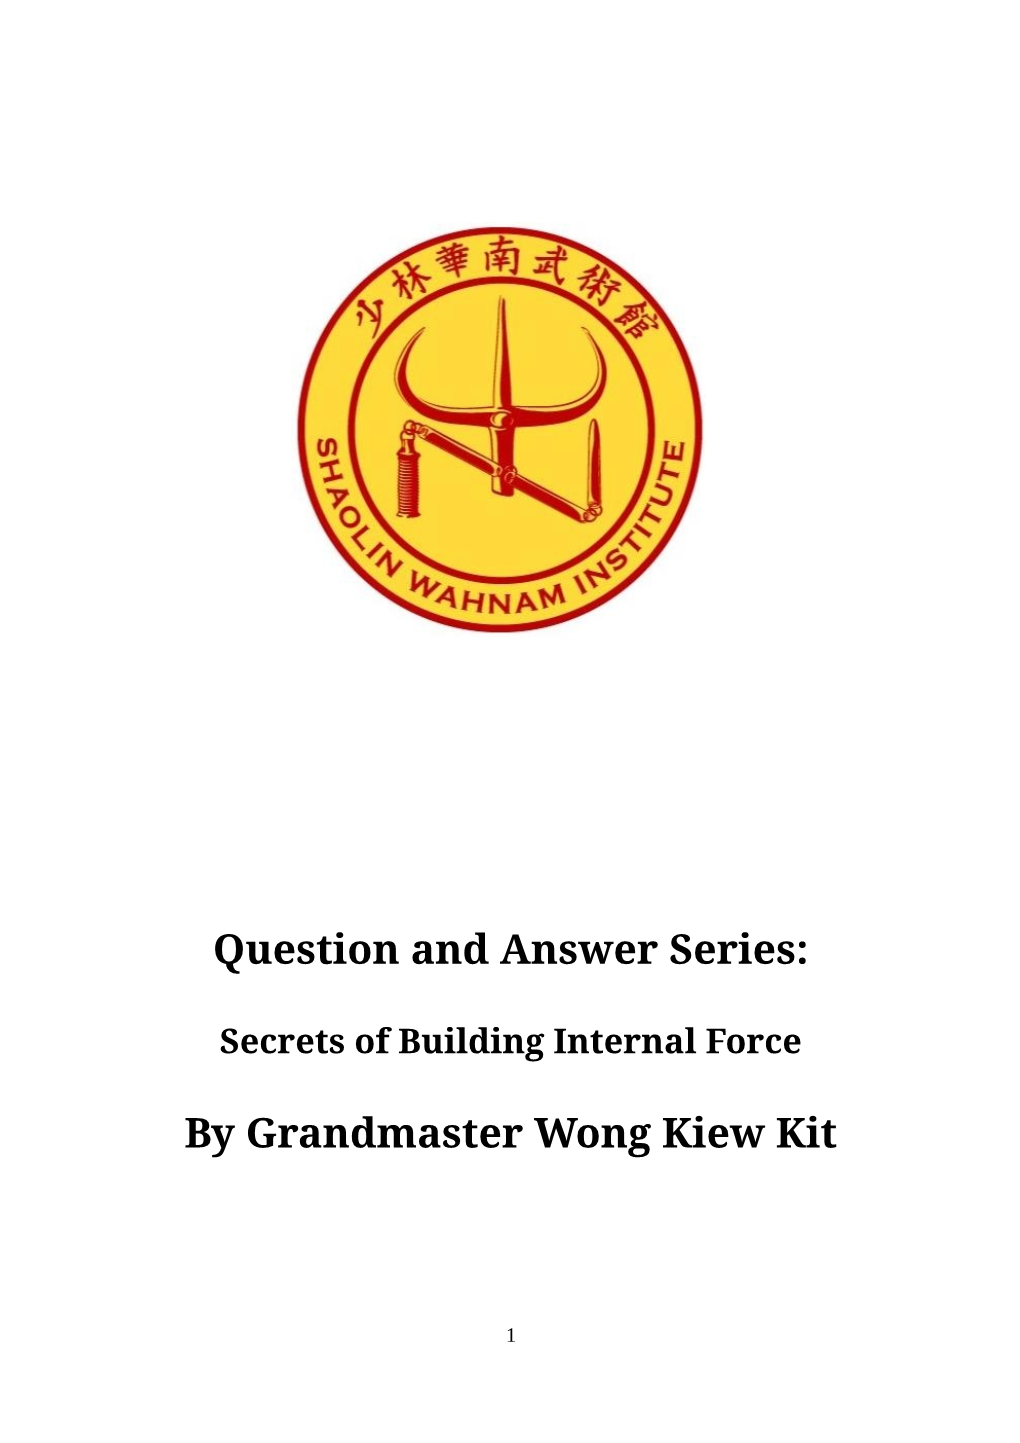 Question and Answer Series: by Grandmaster Wong Kiew